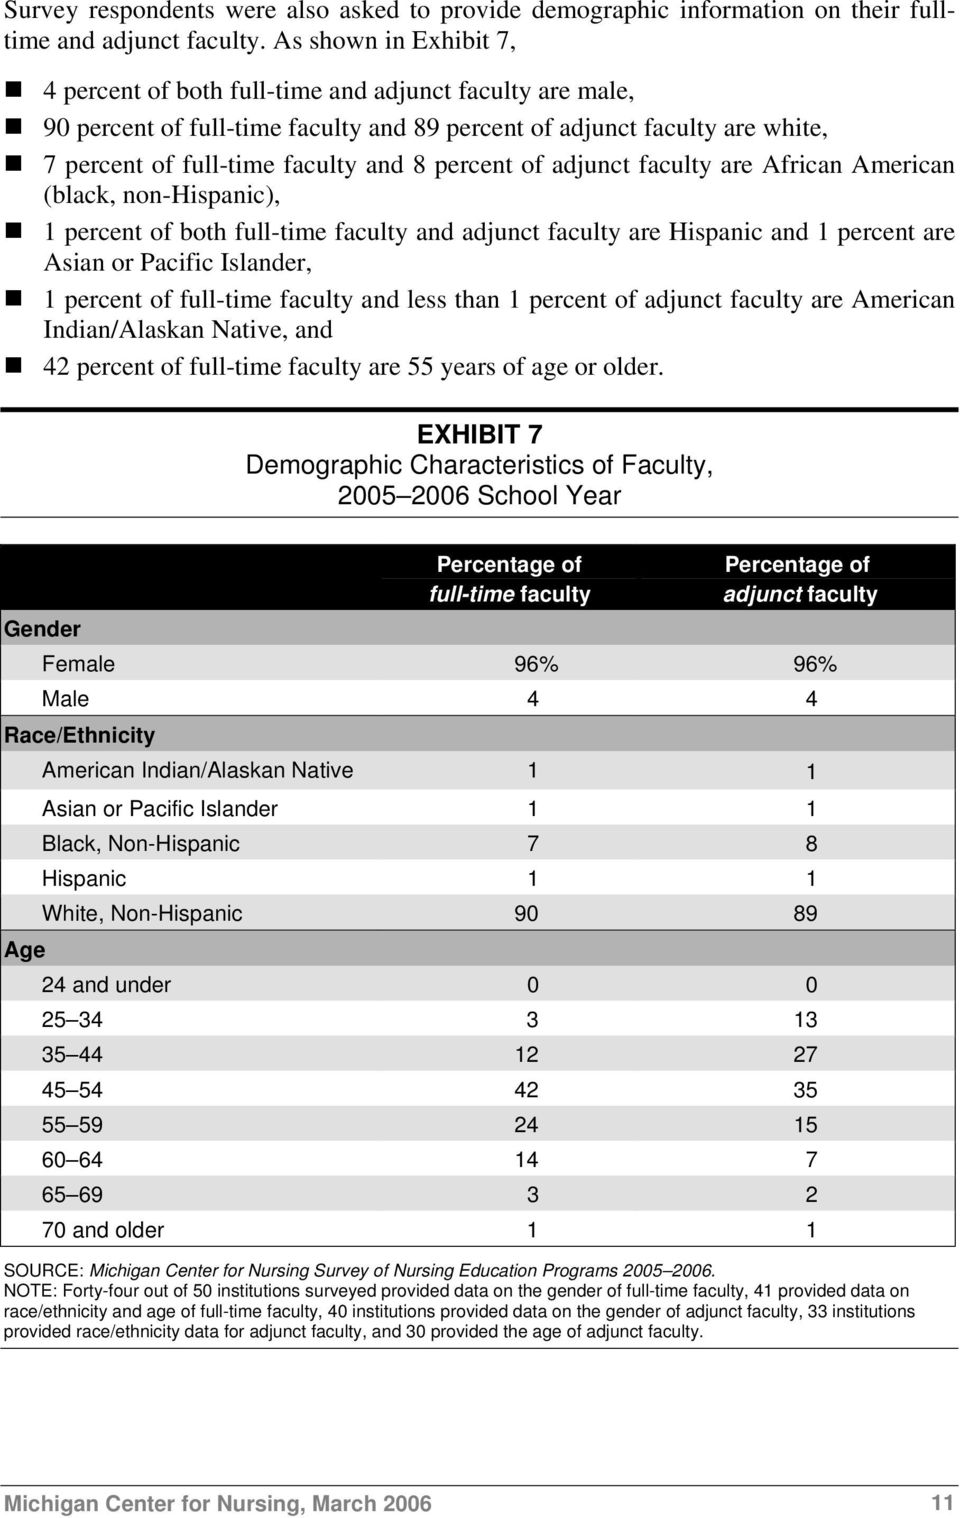 percent of adjunct faculty are African American (black, non-hispanic), 1 percent of both full-time faculty and adjunct faculty are Hispanic and 1 percent are Asian or Pacific Islander, 1 percent of